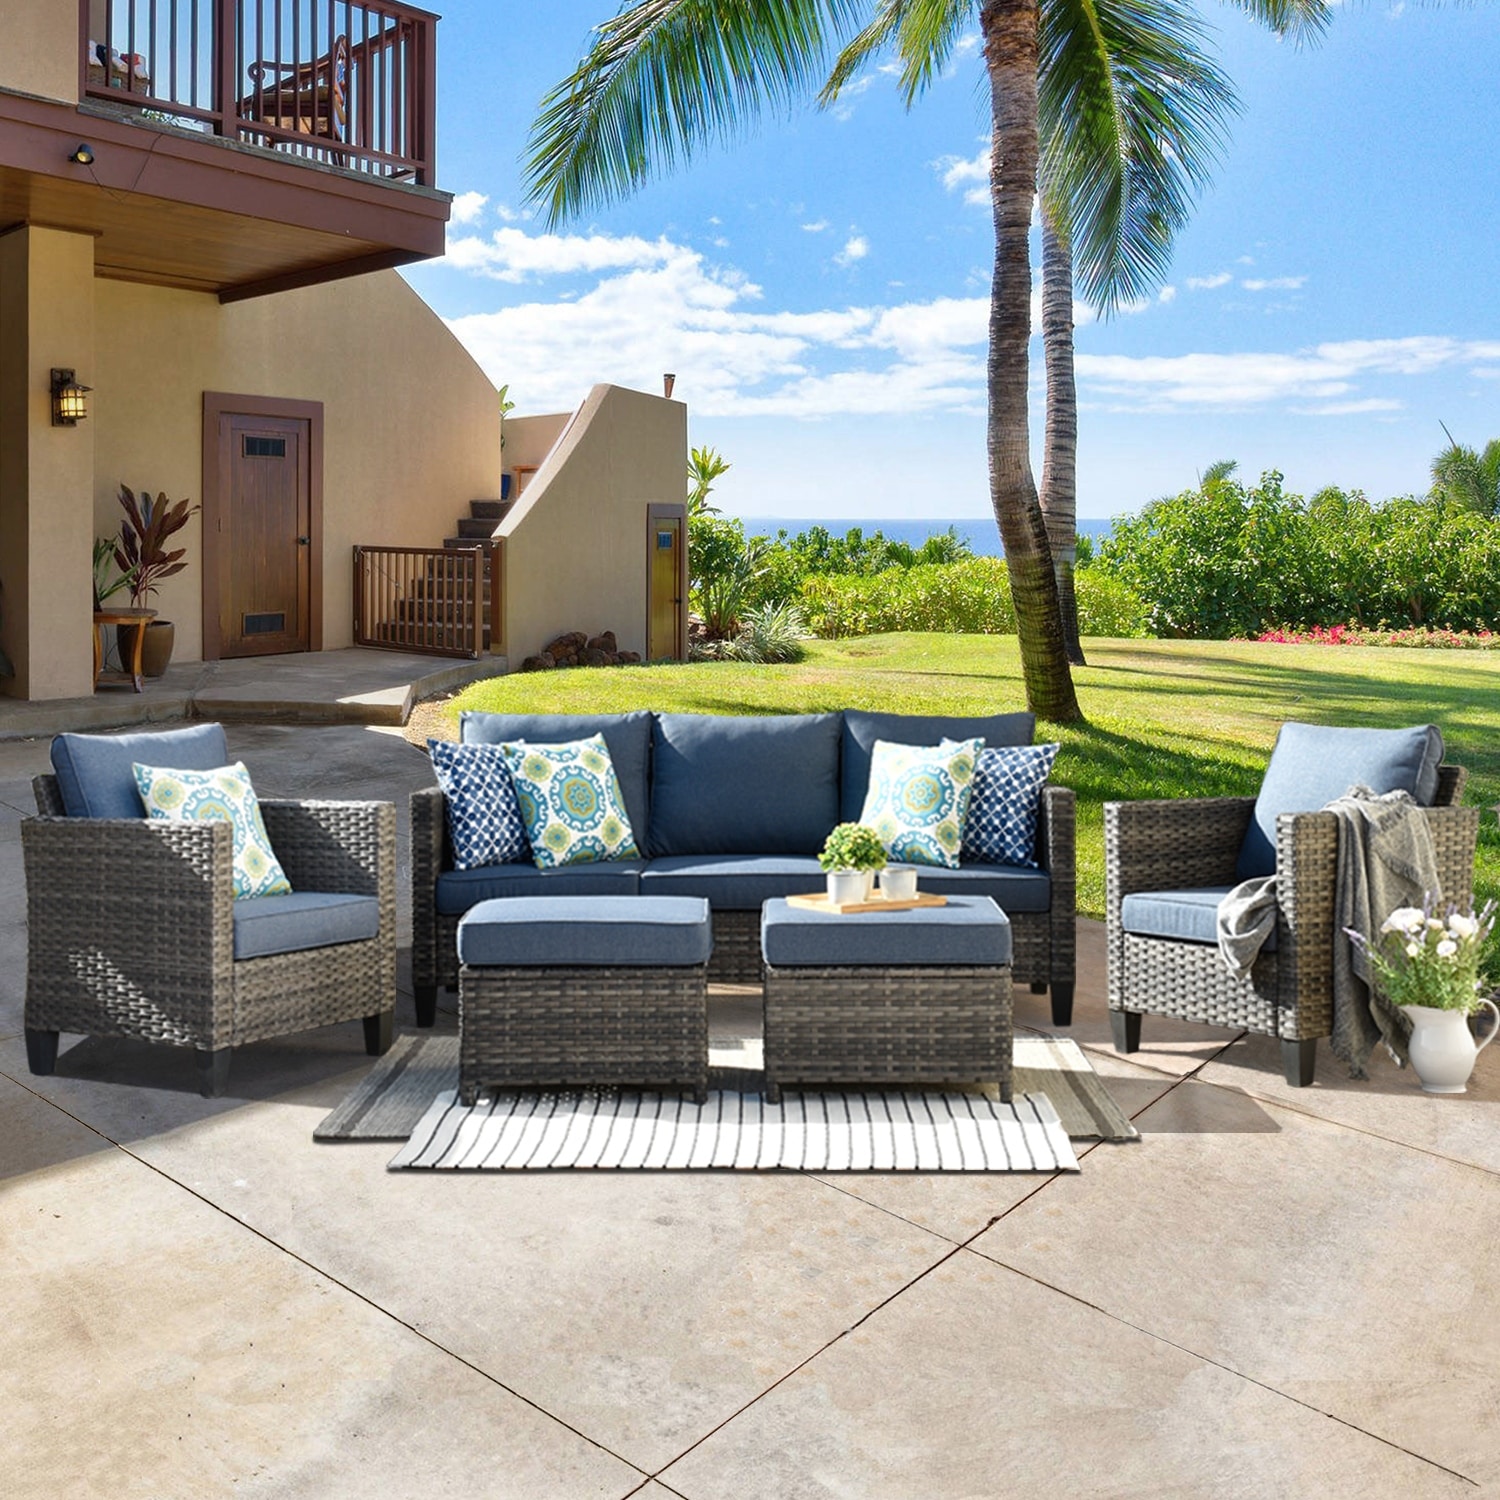 Ovios 5-piece Outdoor High-back Wicker Patio Sectional Set